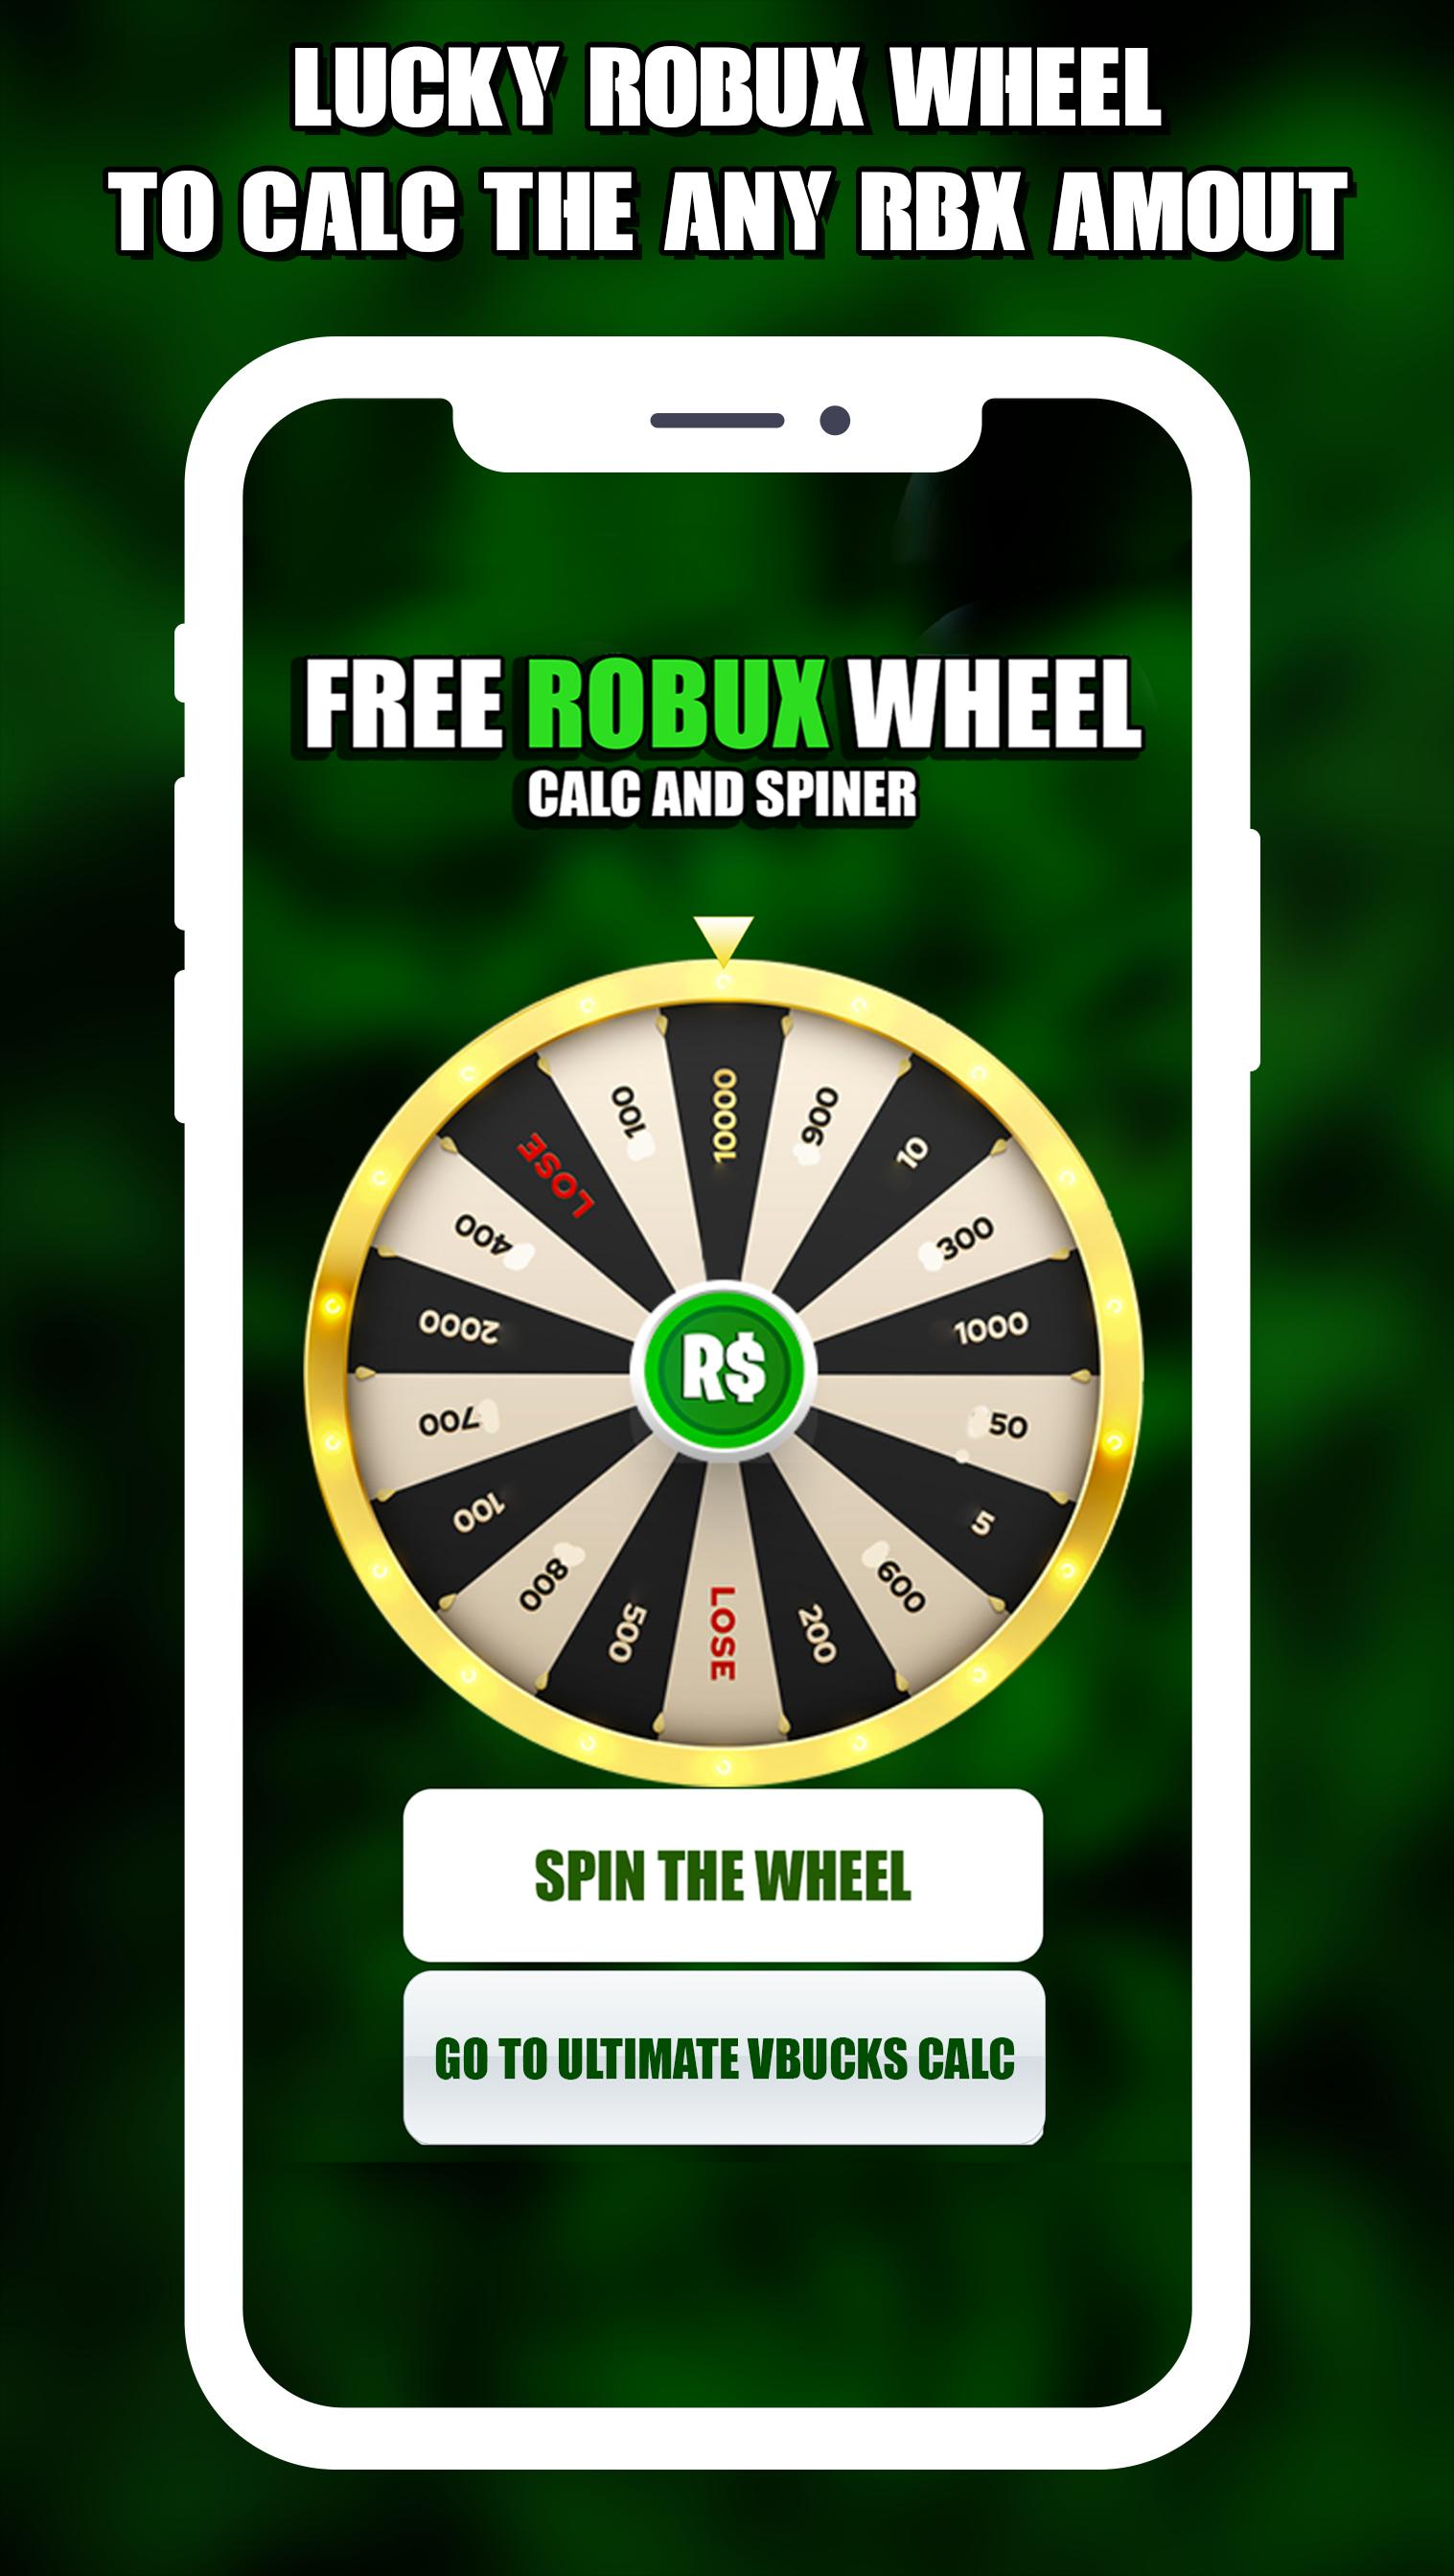 Robux 2020 Free Robux Spin Wheel For Robloxs For Android Apk Download - calculator for robux free v1 3 com robux roblox freecalc for